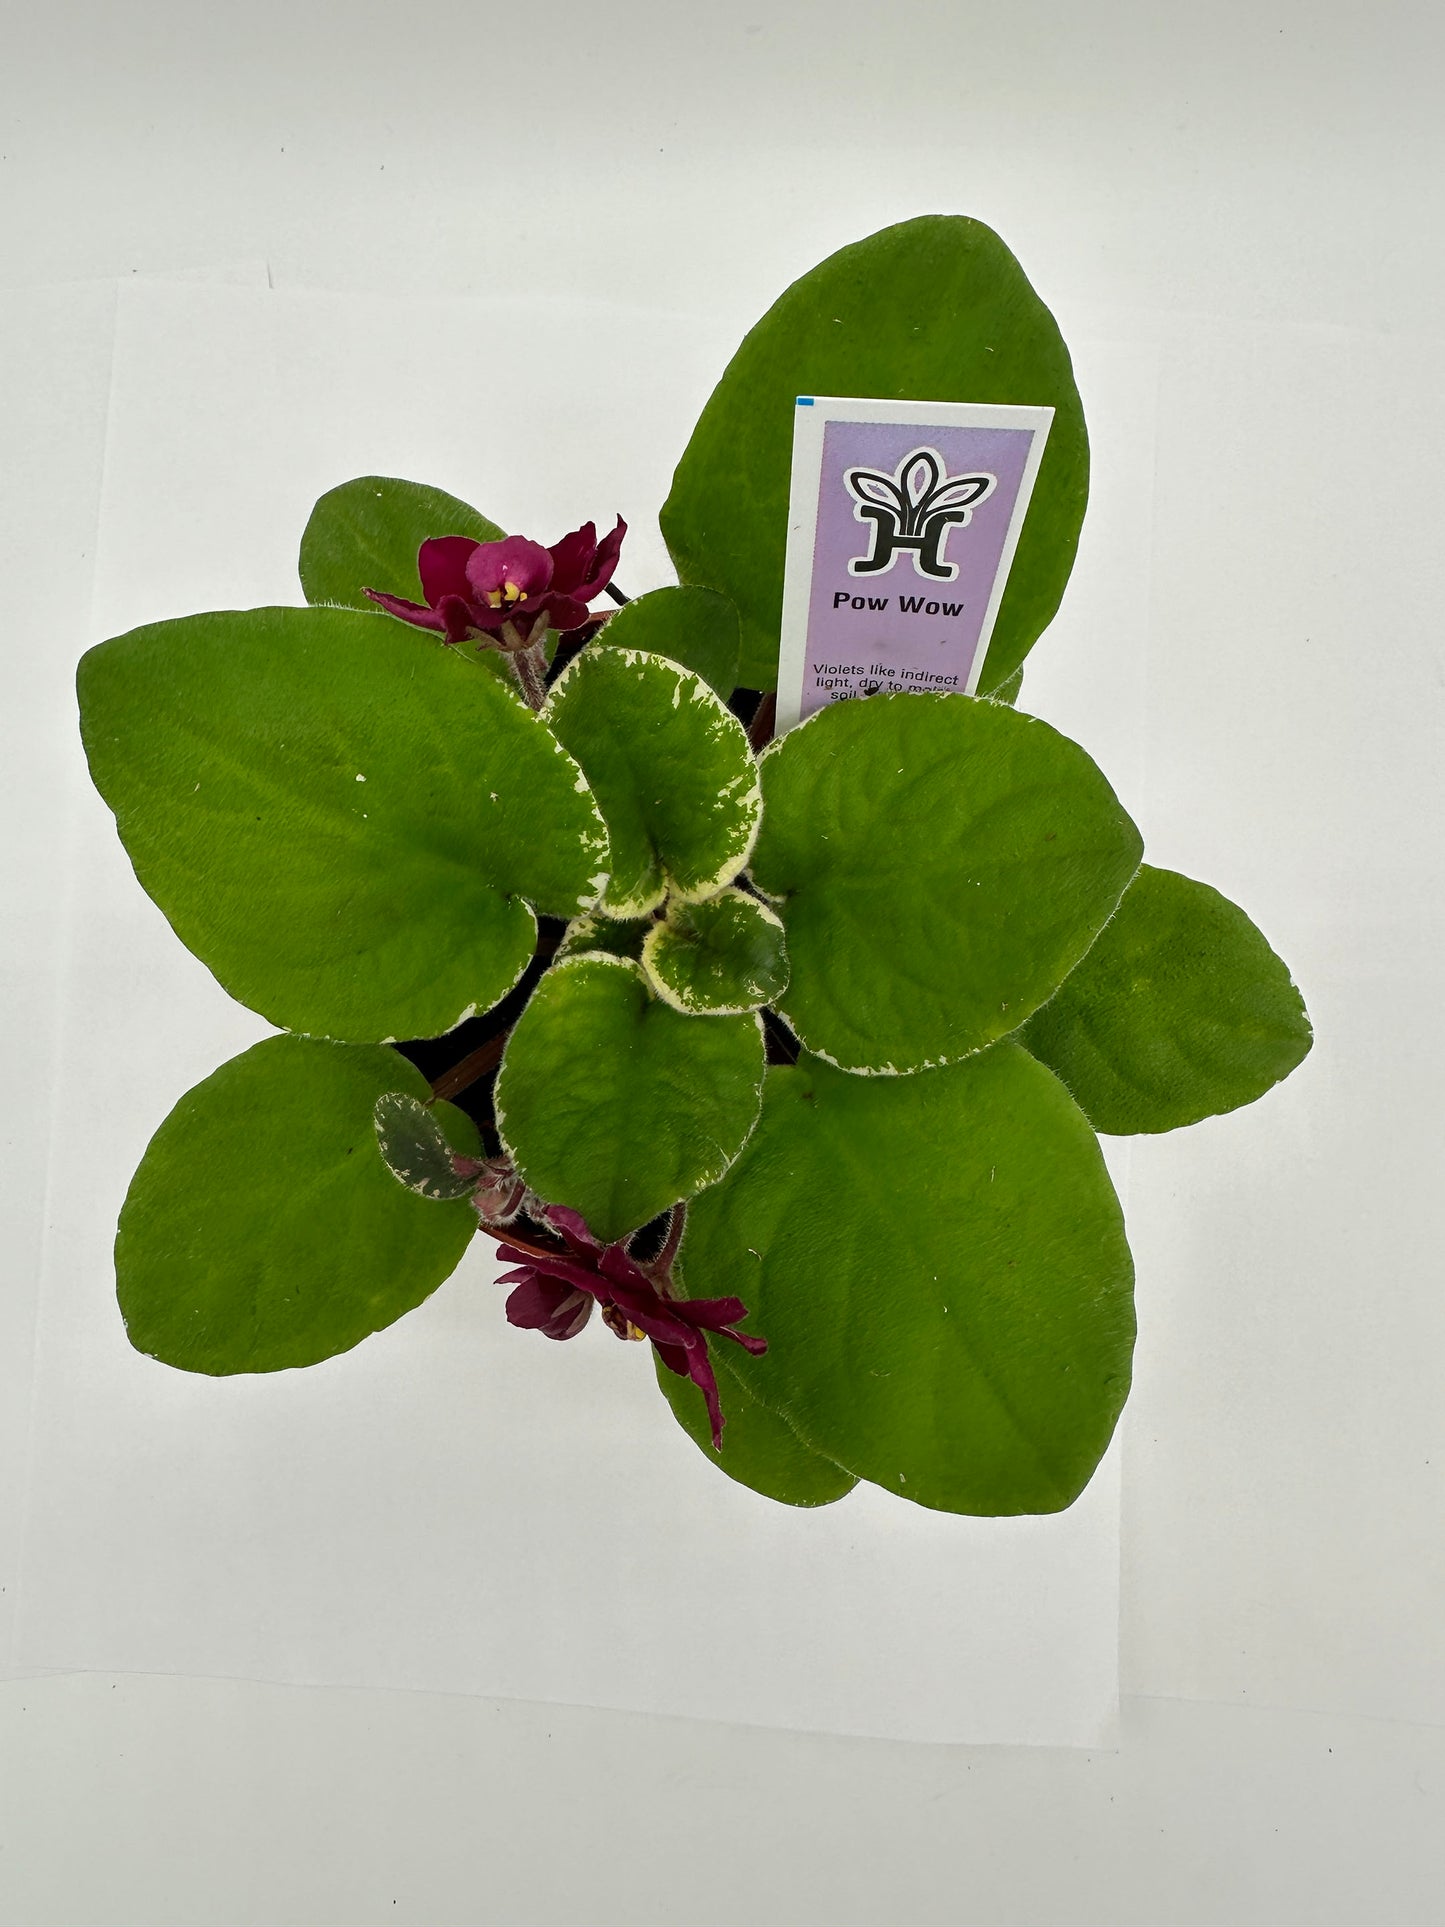 Pow Wow - Live African Violet 4"